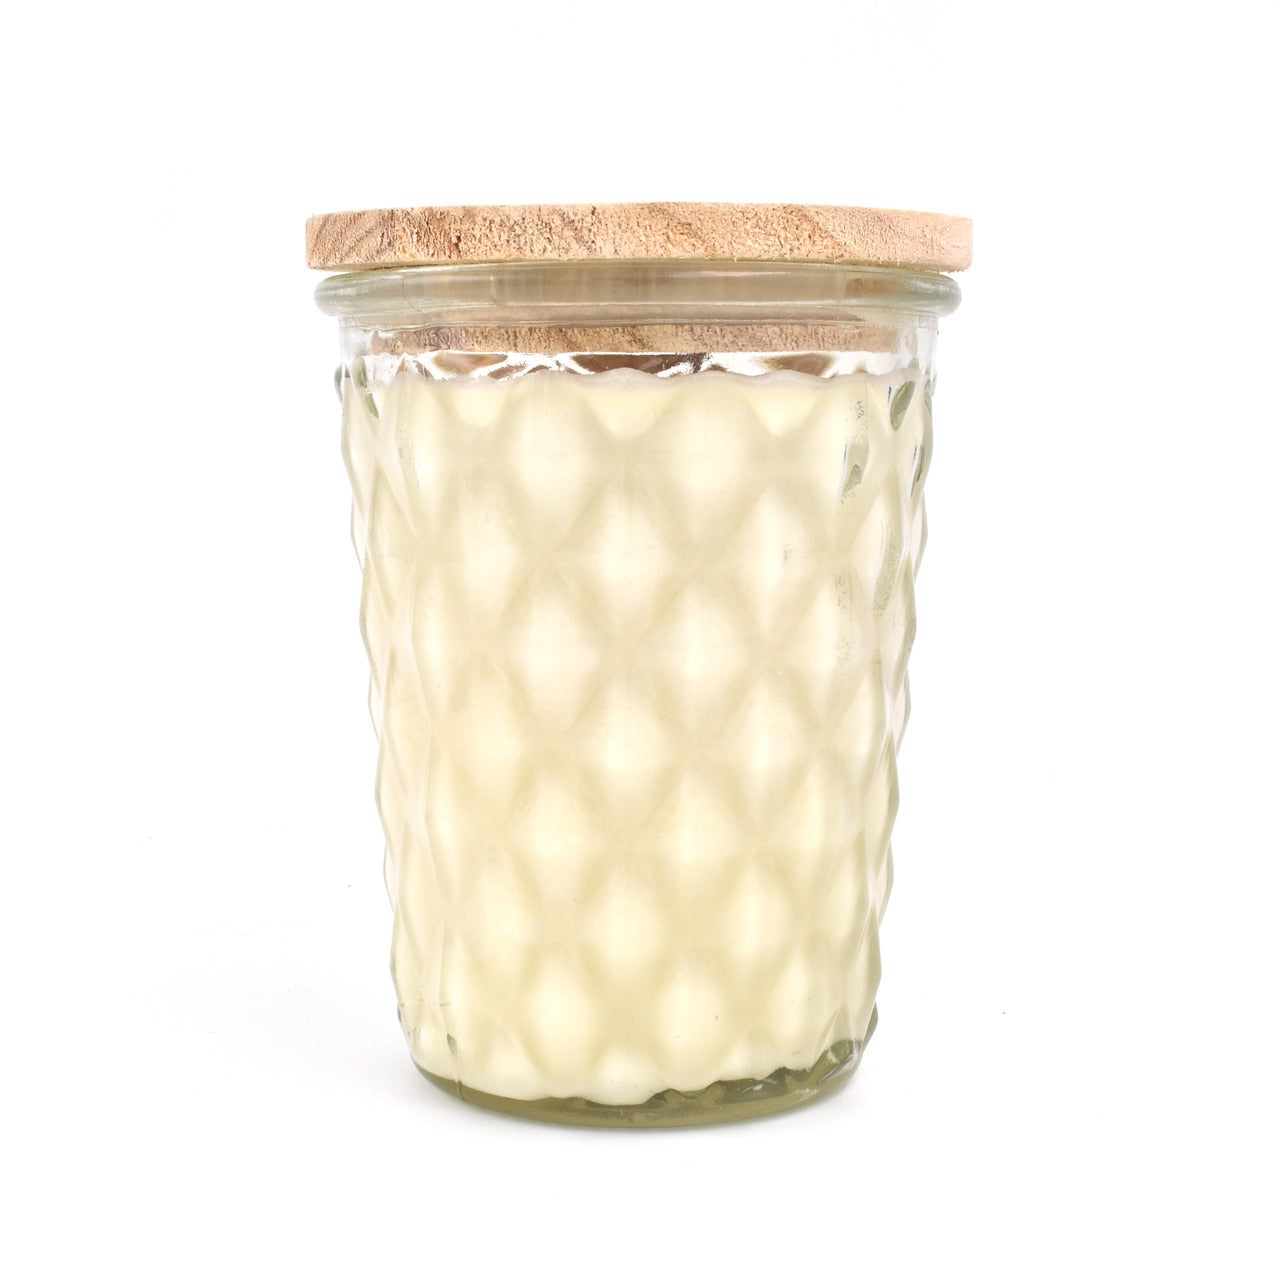 candle in glass jar with a geometric pattern and a wooden lid; the candle is made from ivory colored wax.